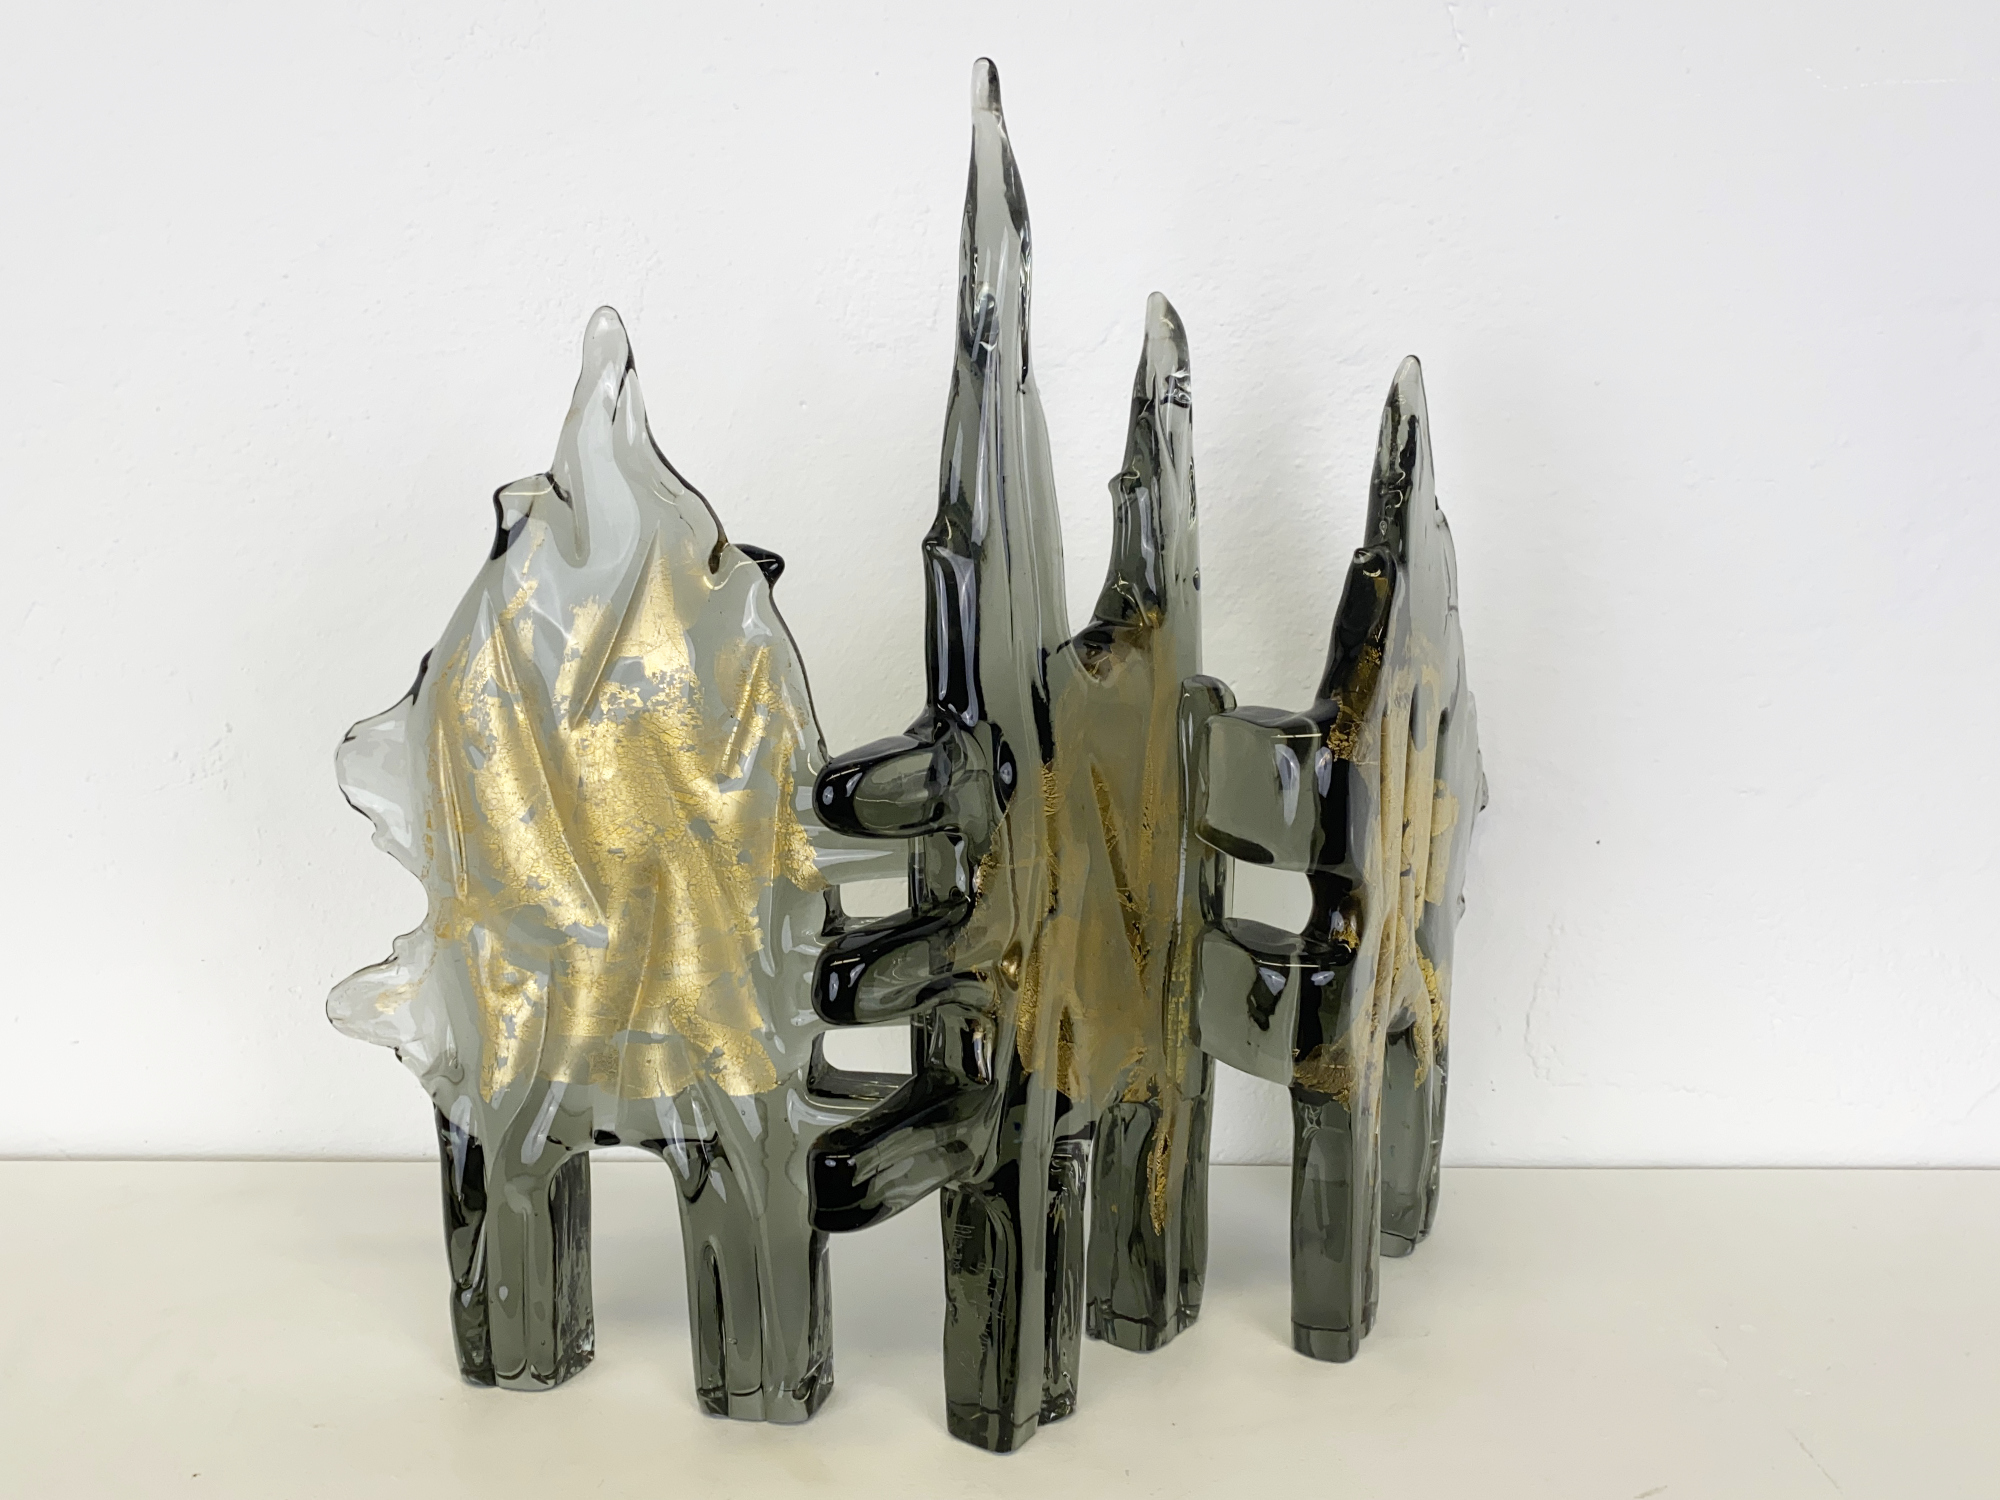 Glass Sculpture / Object “Gold Forest”, limited Edition 5/10, by Livio Seguso, Murano, Italy 1971